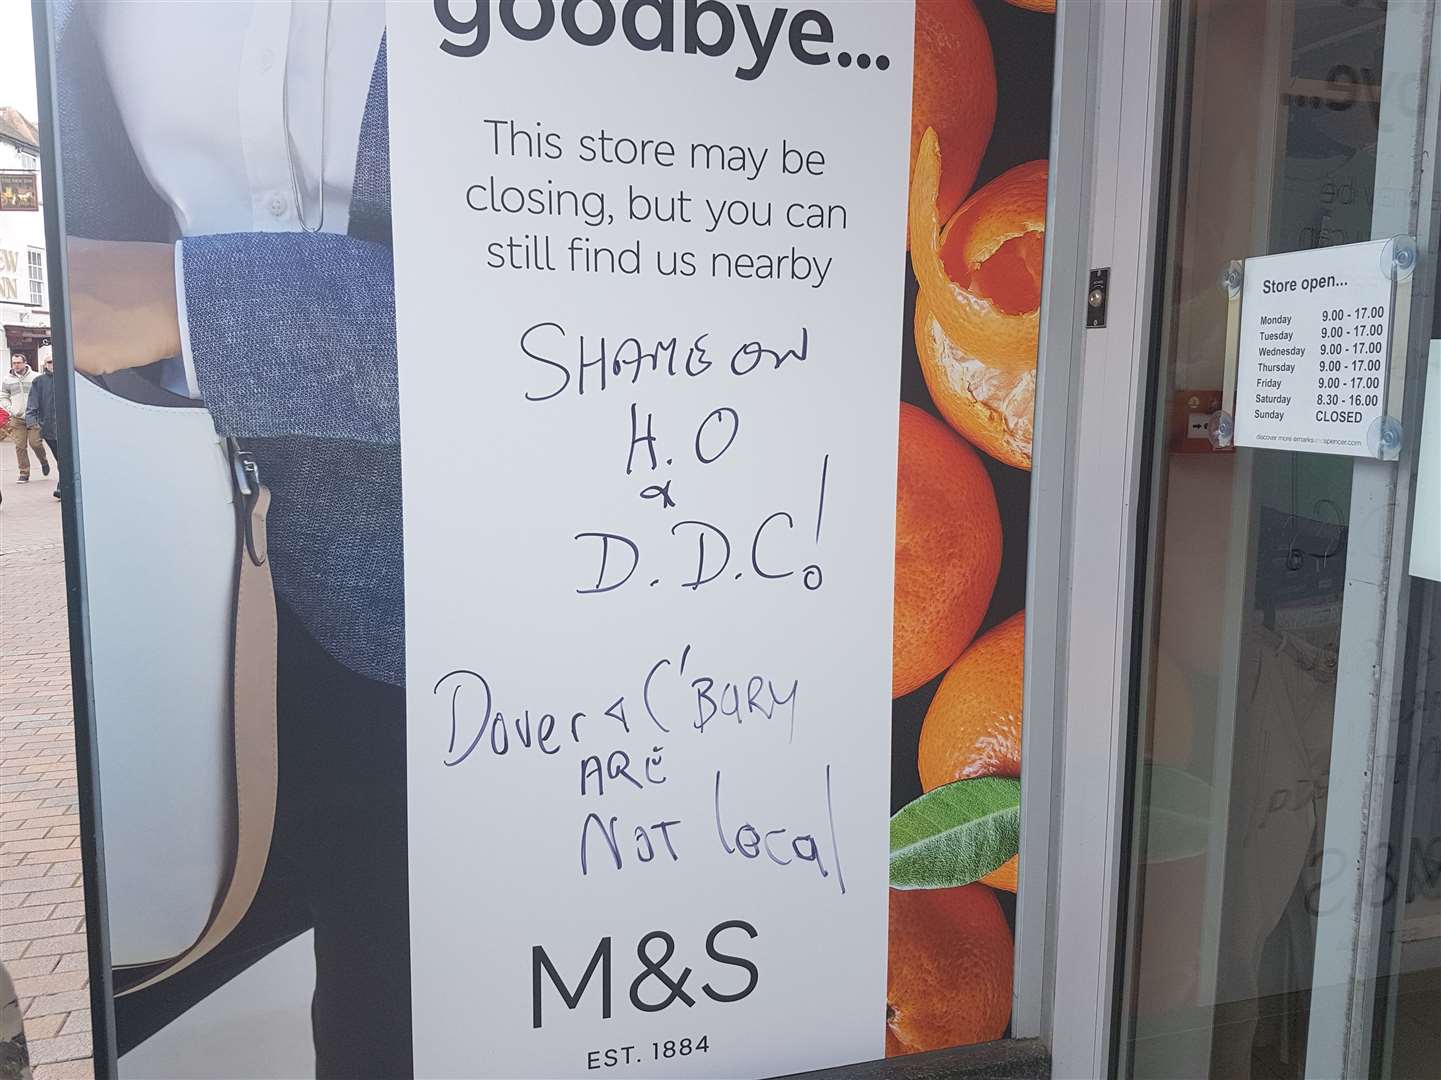 Some of the graffiti says that Dover District Council and Marks and Spencer should be ashamed